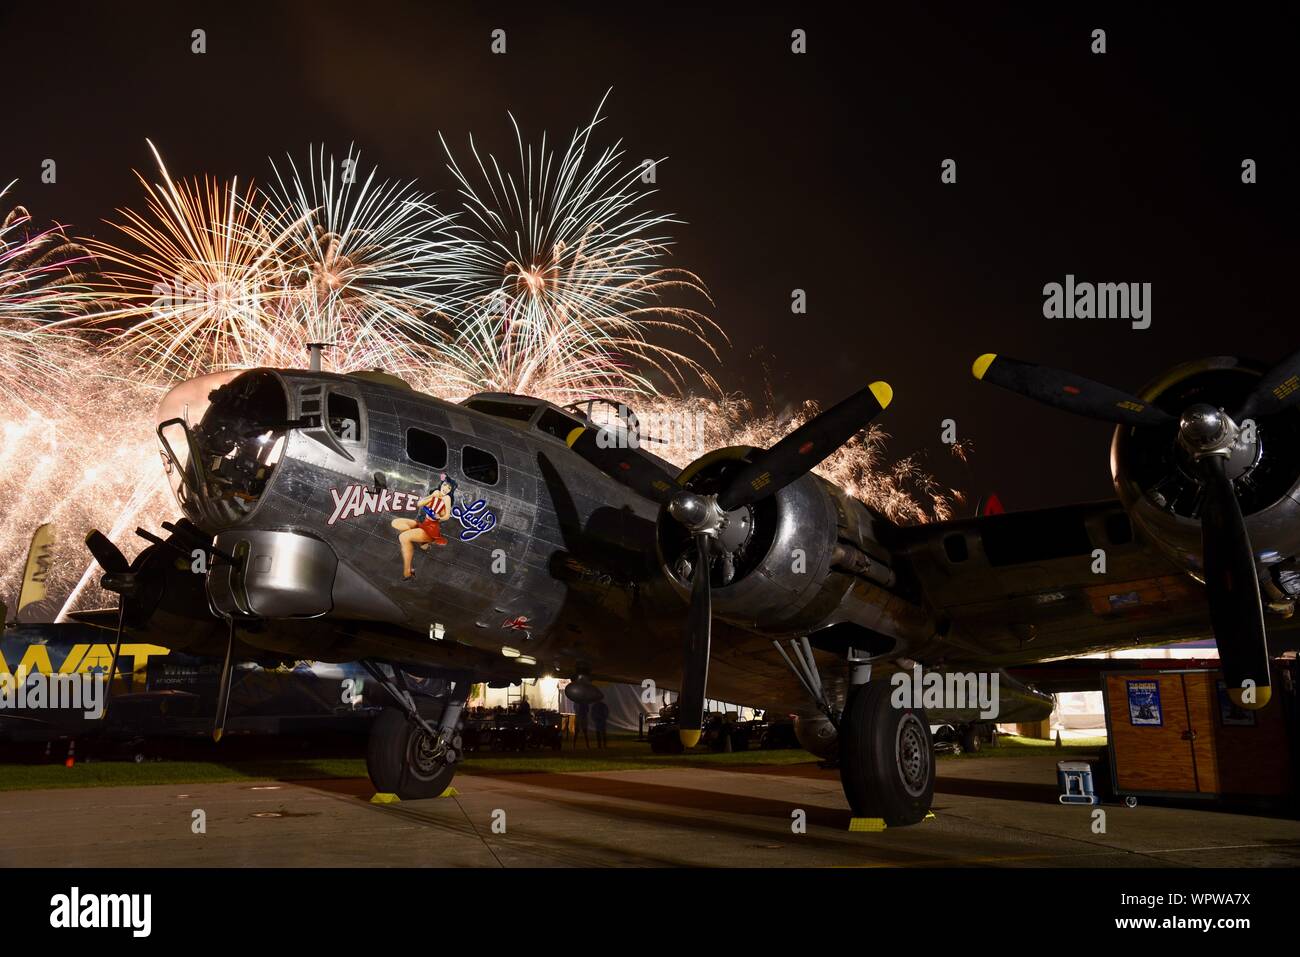 Spectacular fireworks explode behind 'Yankee Lady' B-17 World War 2 bomber aircraft parked in Boeing Plaza of EAA AirVenture, Oshkosh, Wisconsin, USA Stock Photo